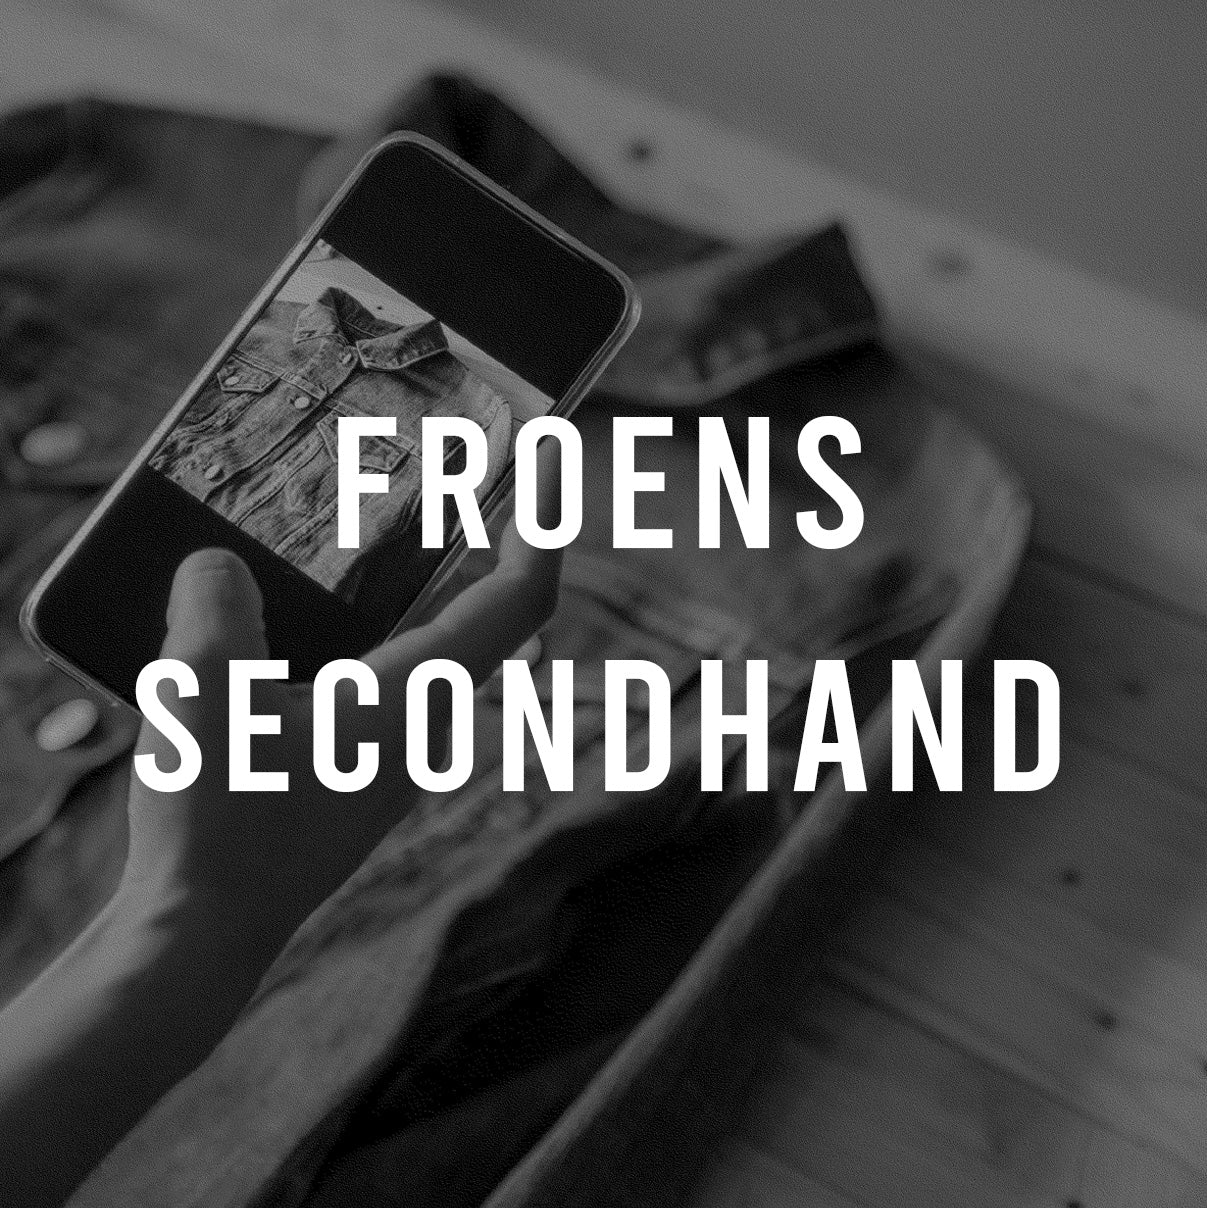 Froens Secondhand